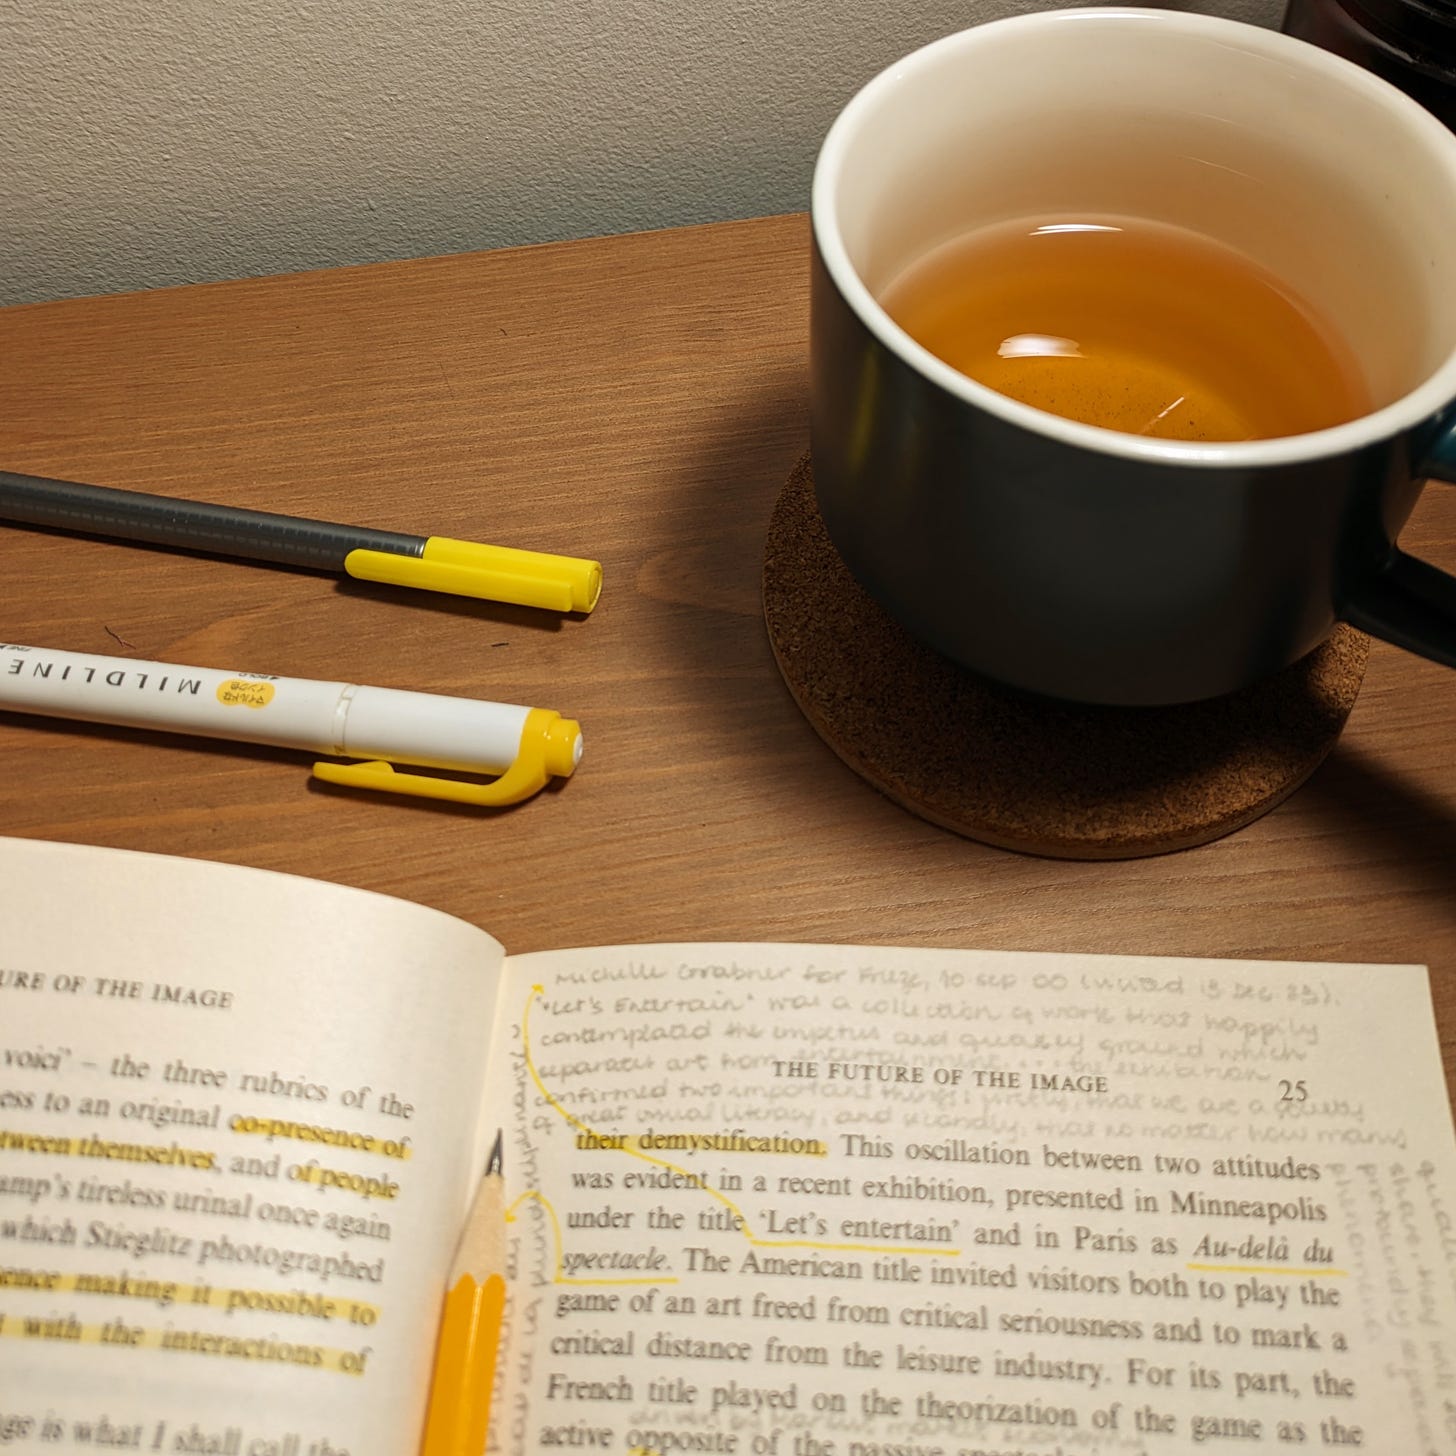 Photo of a desktop, with a dark green mug of tea at top right, a yellow fineliner pen and a yellow highlighter on the desk, and a book open with annotations across the top of the right-hand page with a yellow pencil holding it open in place.